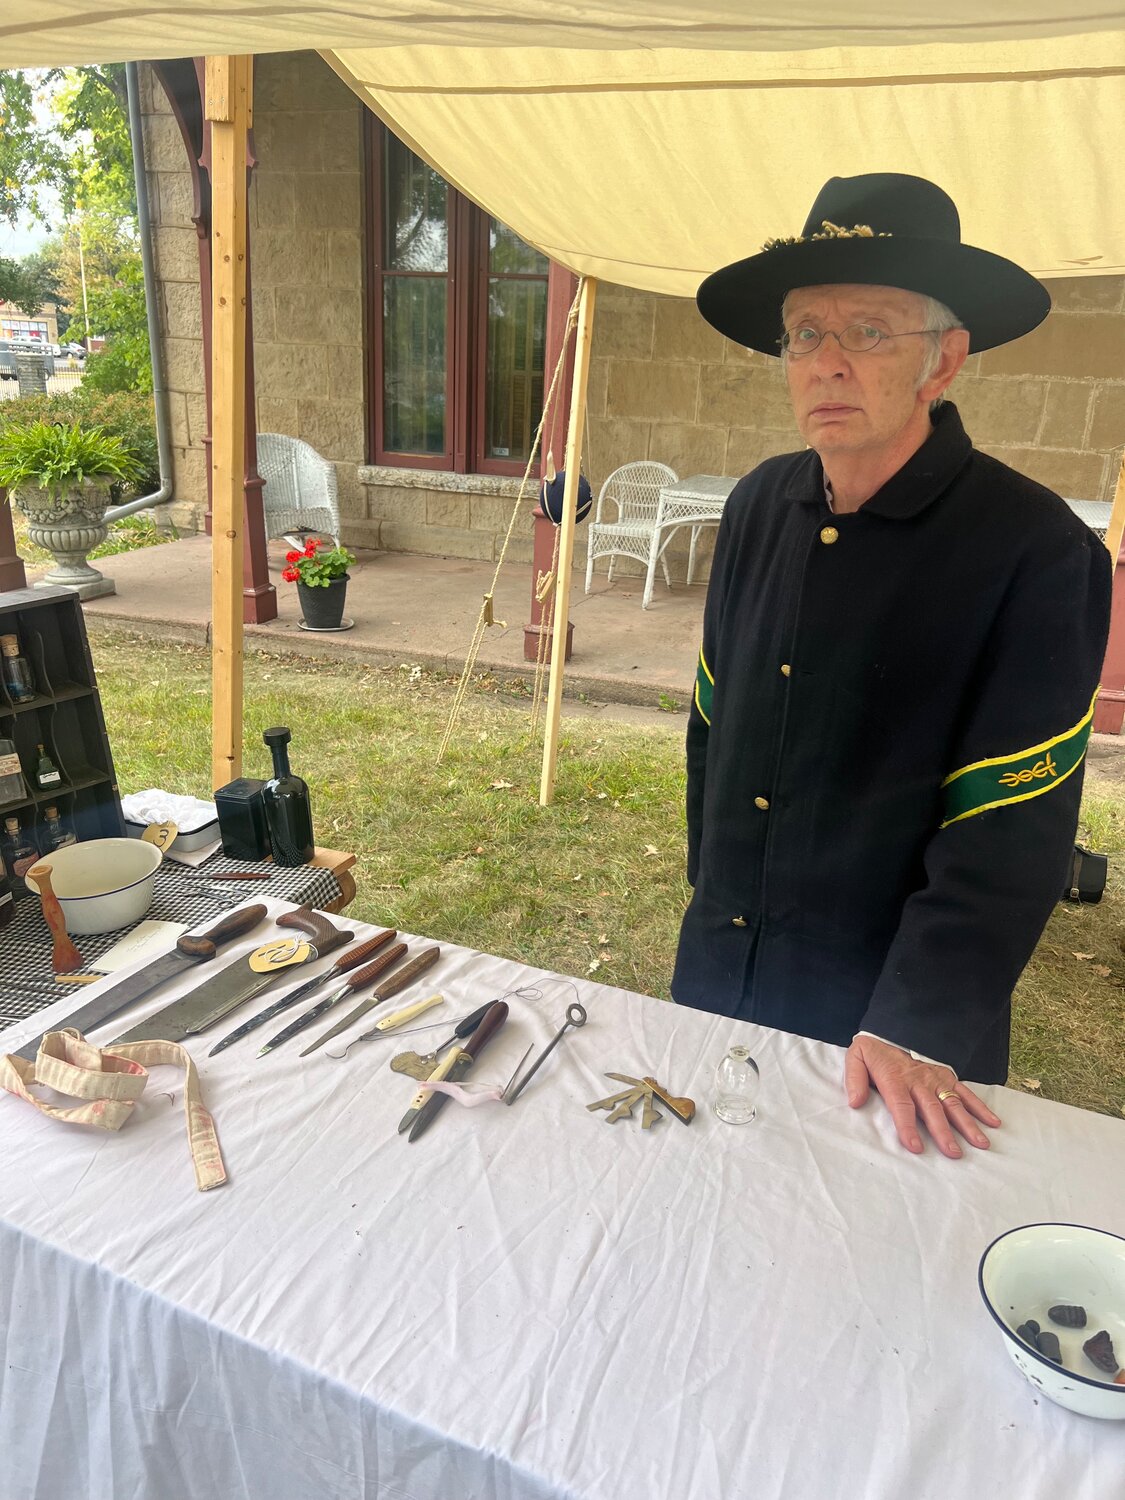 Terry Norton of Rochester “worked” as a doctor in the medical tent as part of the 3rd Minnesota Regiment. Norton explained the tools used to treat soldiers, many of whom faced amputation when ammunition (shown in bowl on right front) pierced their arms and legs. He said many medical advancements came as a result of the Civil War as doctors experimented with various tools and methods to treat injuries and fight infection.